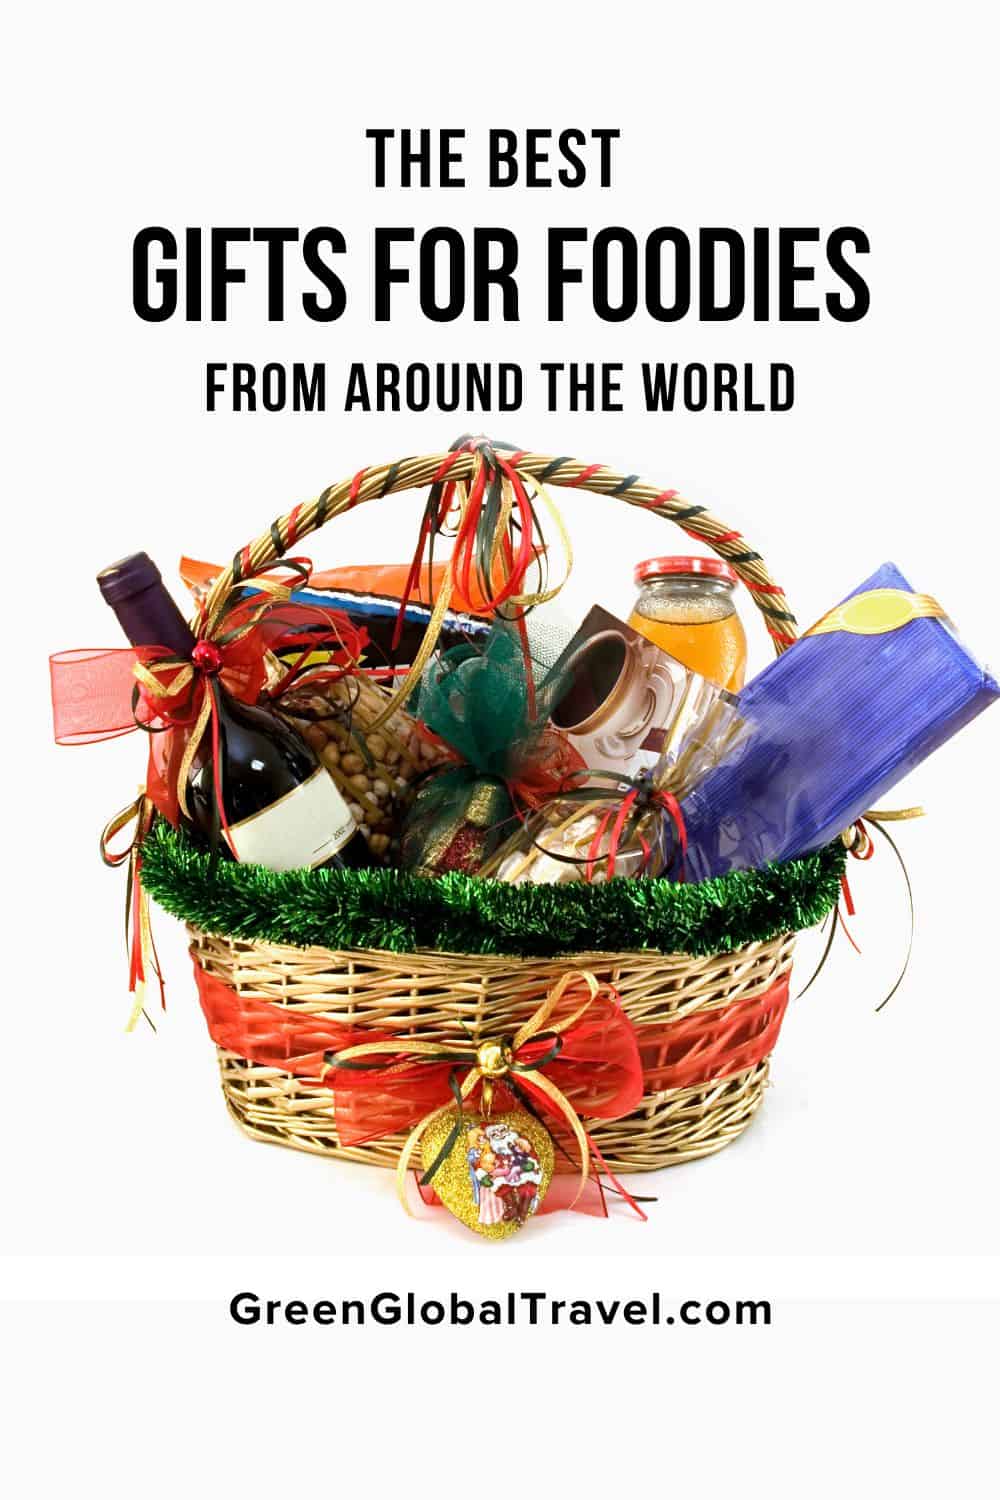 The Best Food Gifts From Around The World includes Chocolate Gift Boxes, Coffee/Tea Gift Sets, International Food Gifts and more! | food gifts for men | best foodie gifts | food presents | foodie gifts for christmas | monthly food subscription boxes | gourmet foodie gifts | foodie gifts | foodie gift basket | gifts for foodies | snack gift box | foodie subscriptions | best gifts for foodies | food around the world box | christmas food gifts sets | gift baskets for travelers | gift foods |